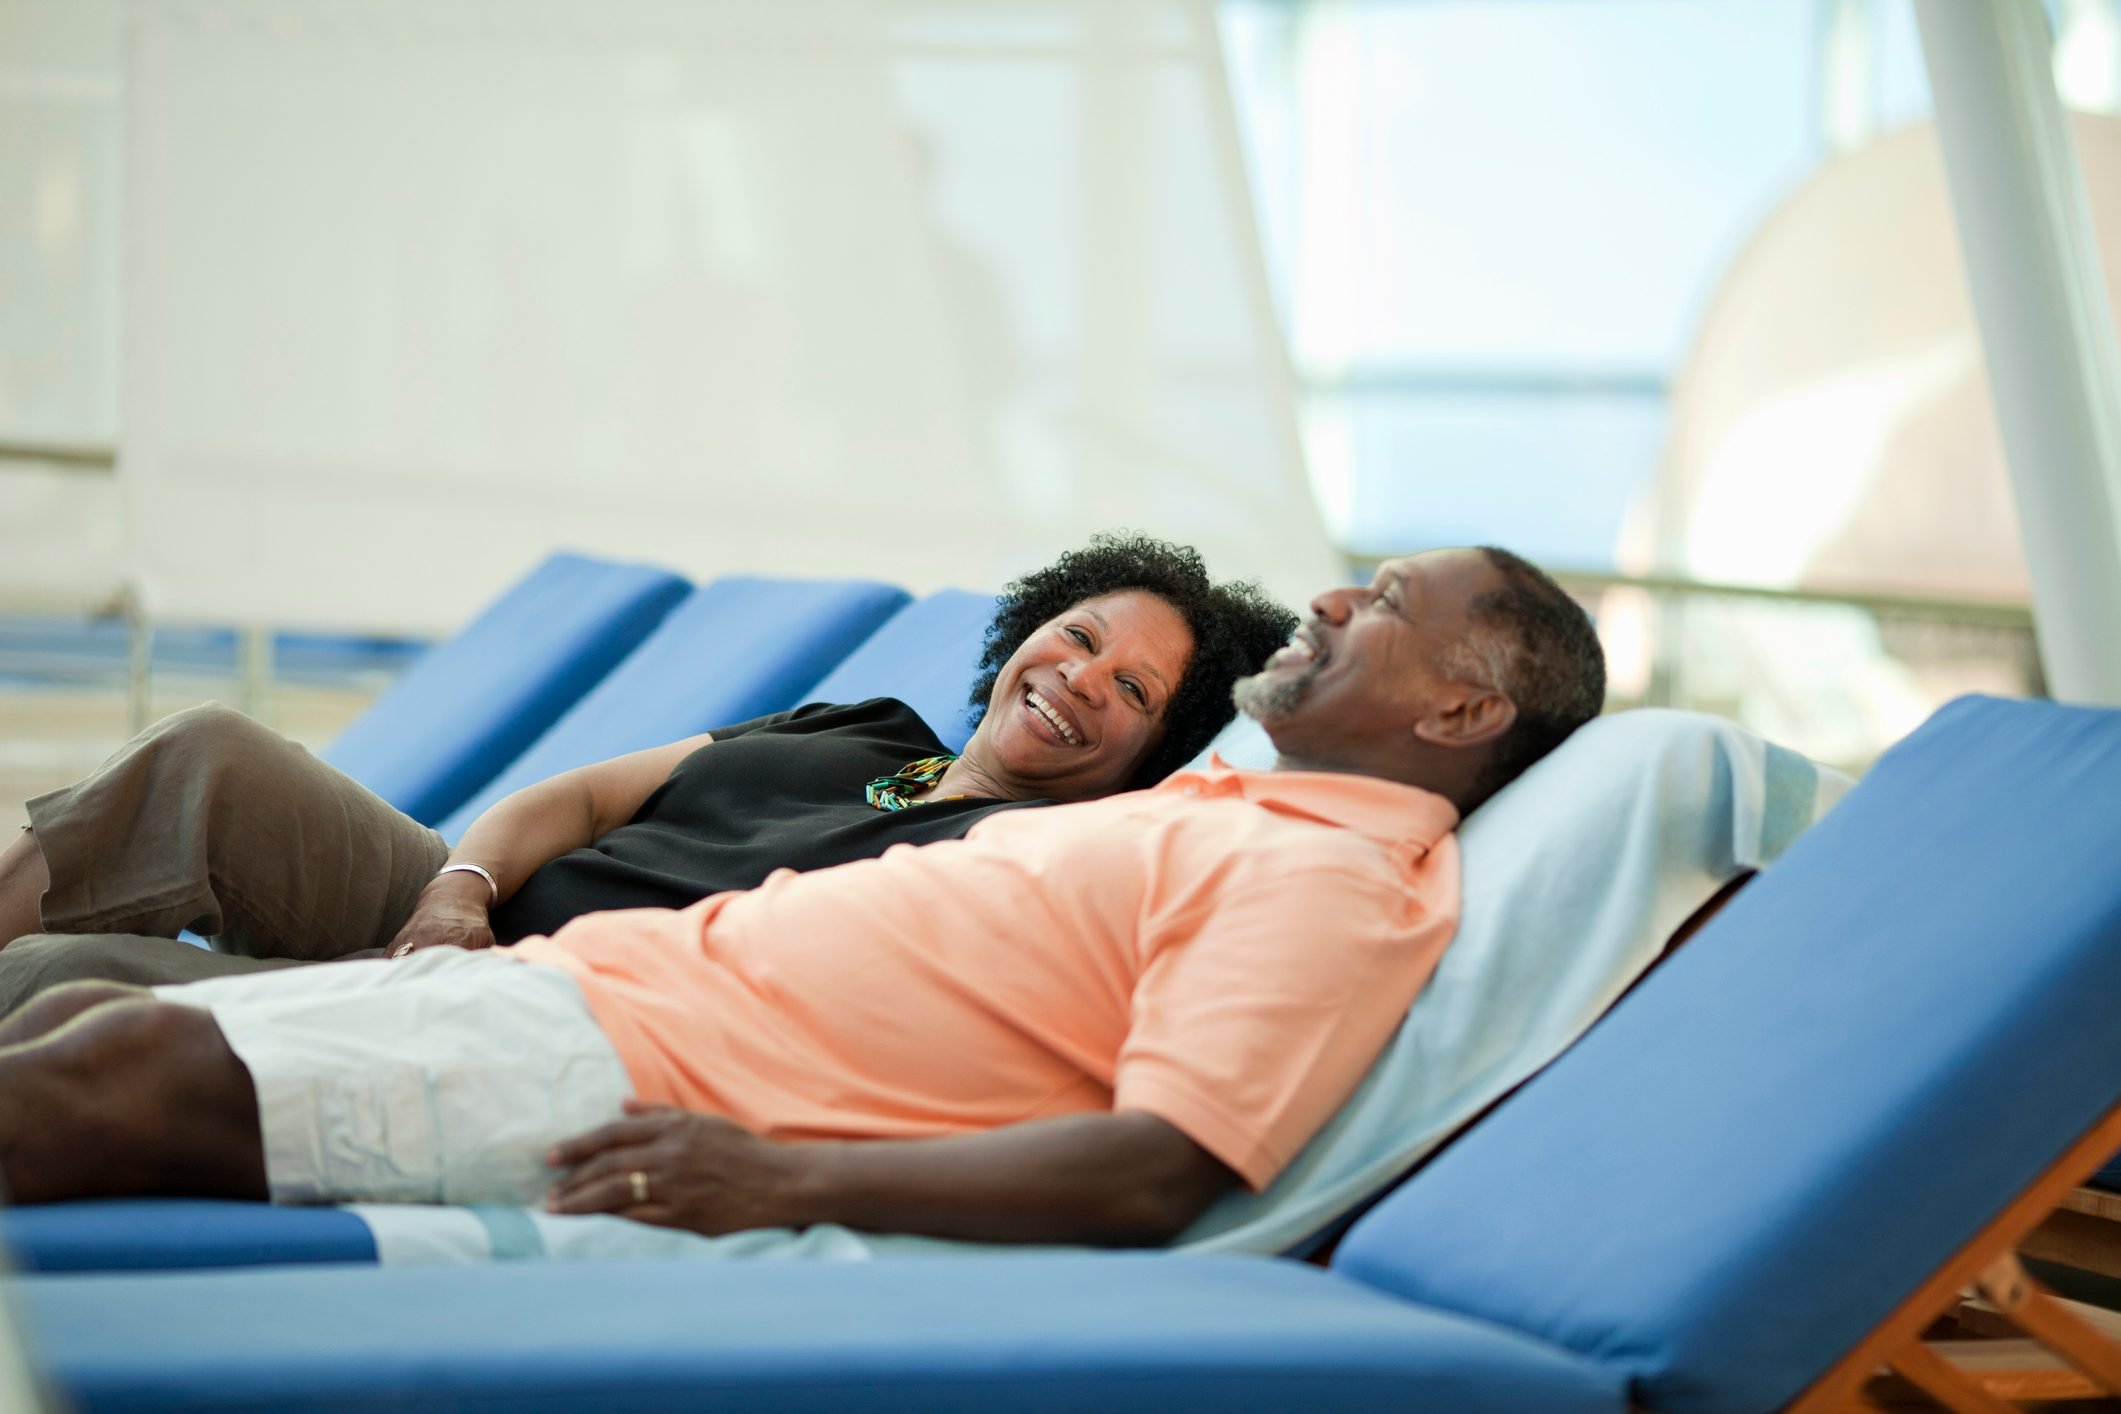 Mature couple on lounge chair on cruise ship